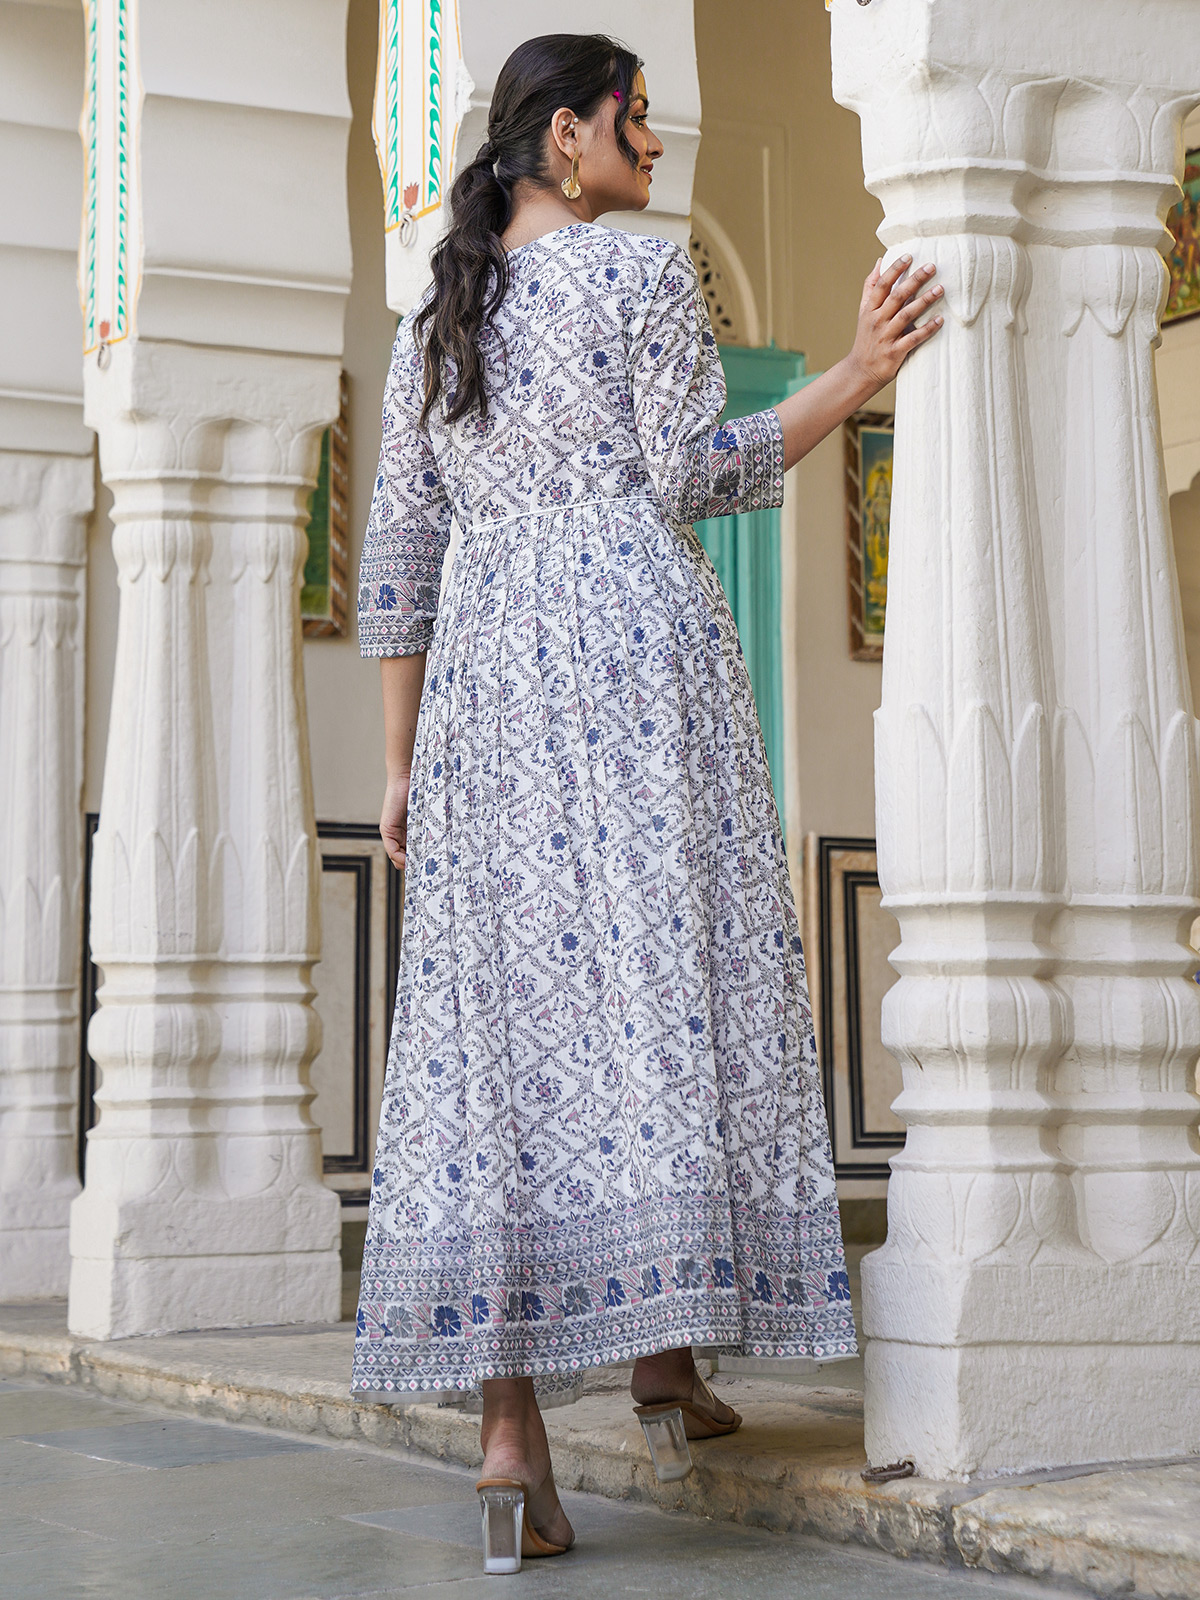 madhuram textiles Women's A-line and Fully Stitched Plain Rayon Printed  Long Kurta(Blue, Small) M-2082 : Amazon.in: Fashion